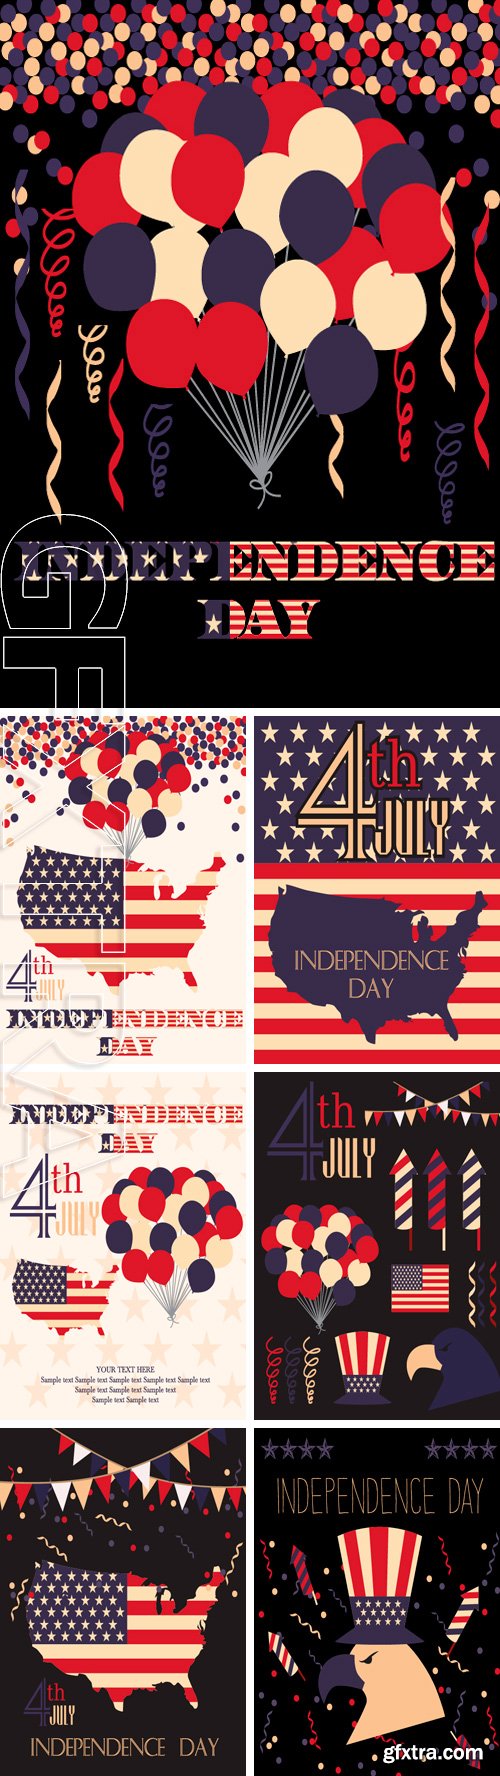 Stock Vectors - Independence Day greeting card